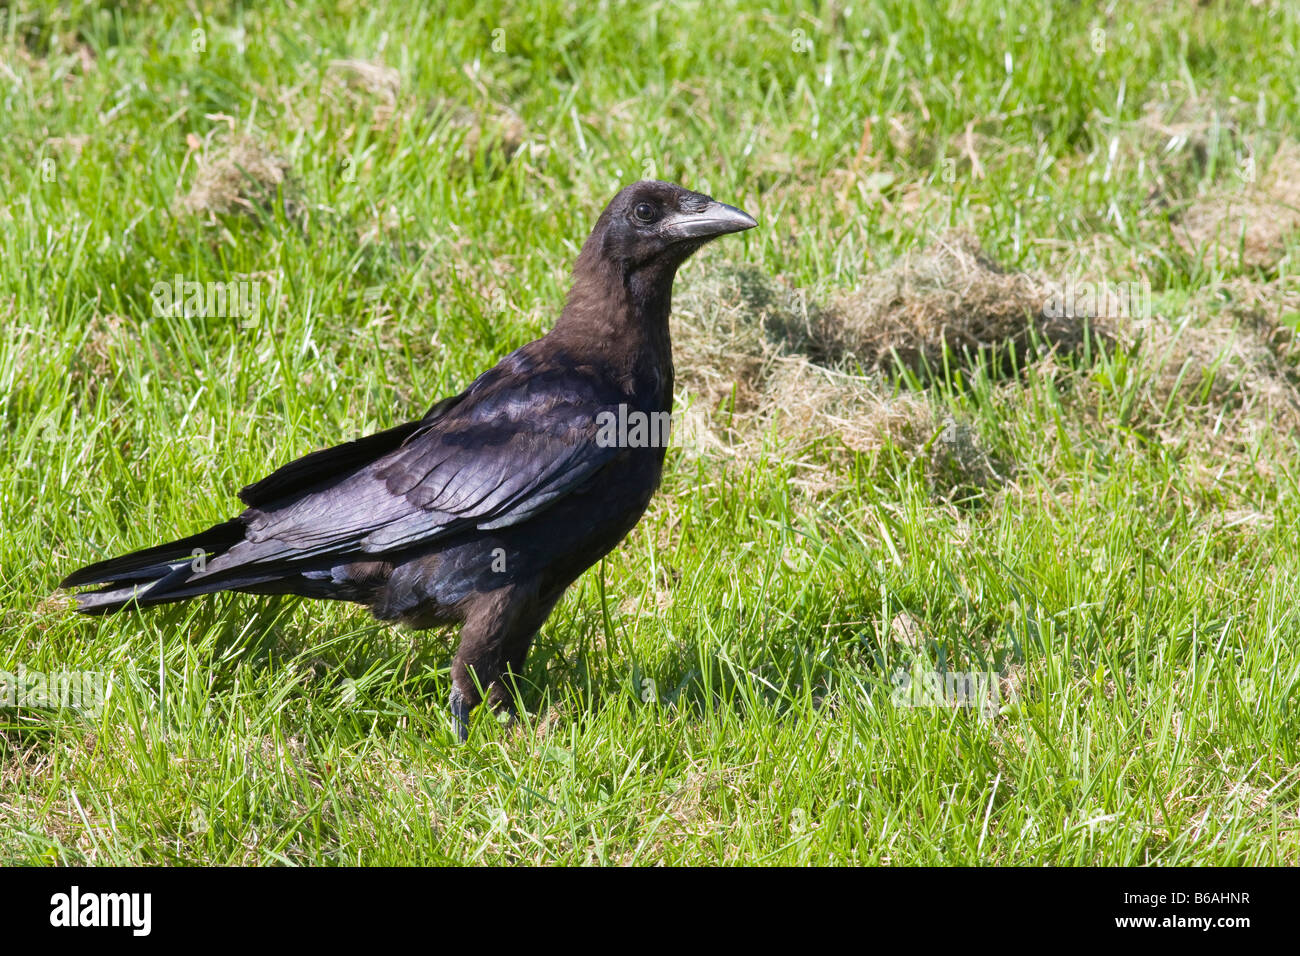 Young Rook (Corvus frugilegus) on lawn Stock Photo